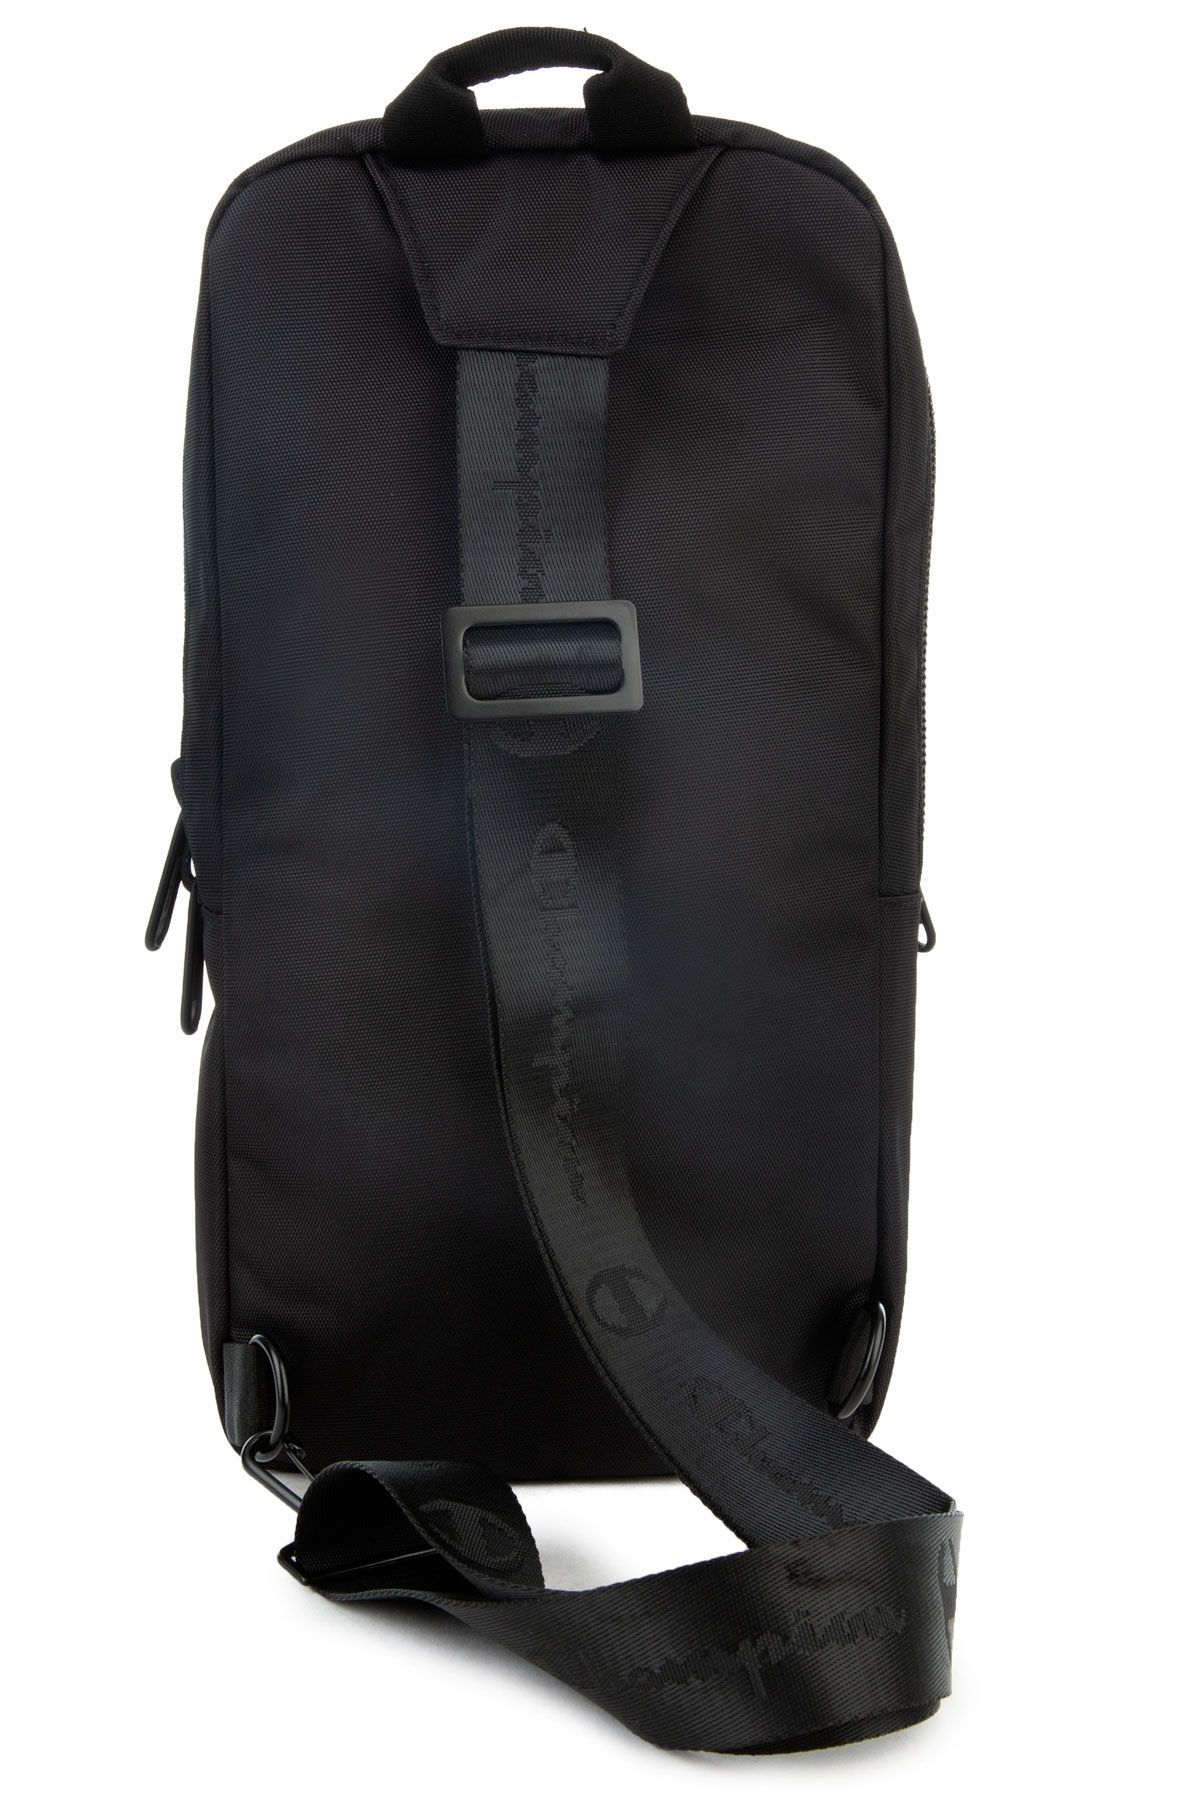 CHAMPION Stealth Sling Backpack in CH1063-001 - Shiekh